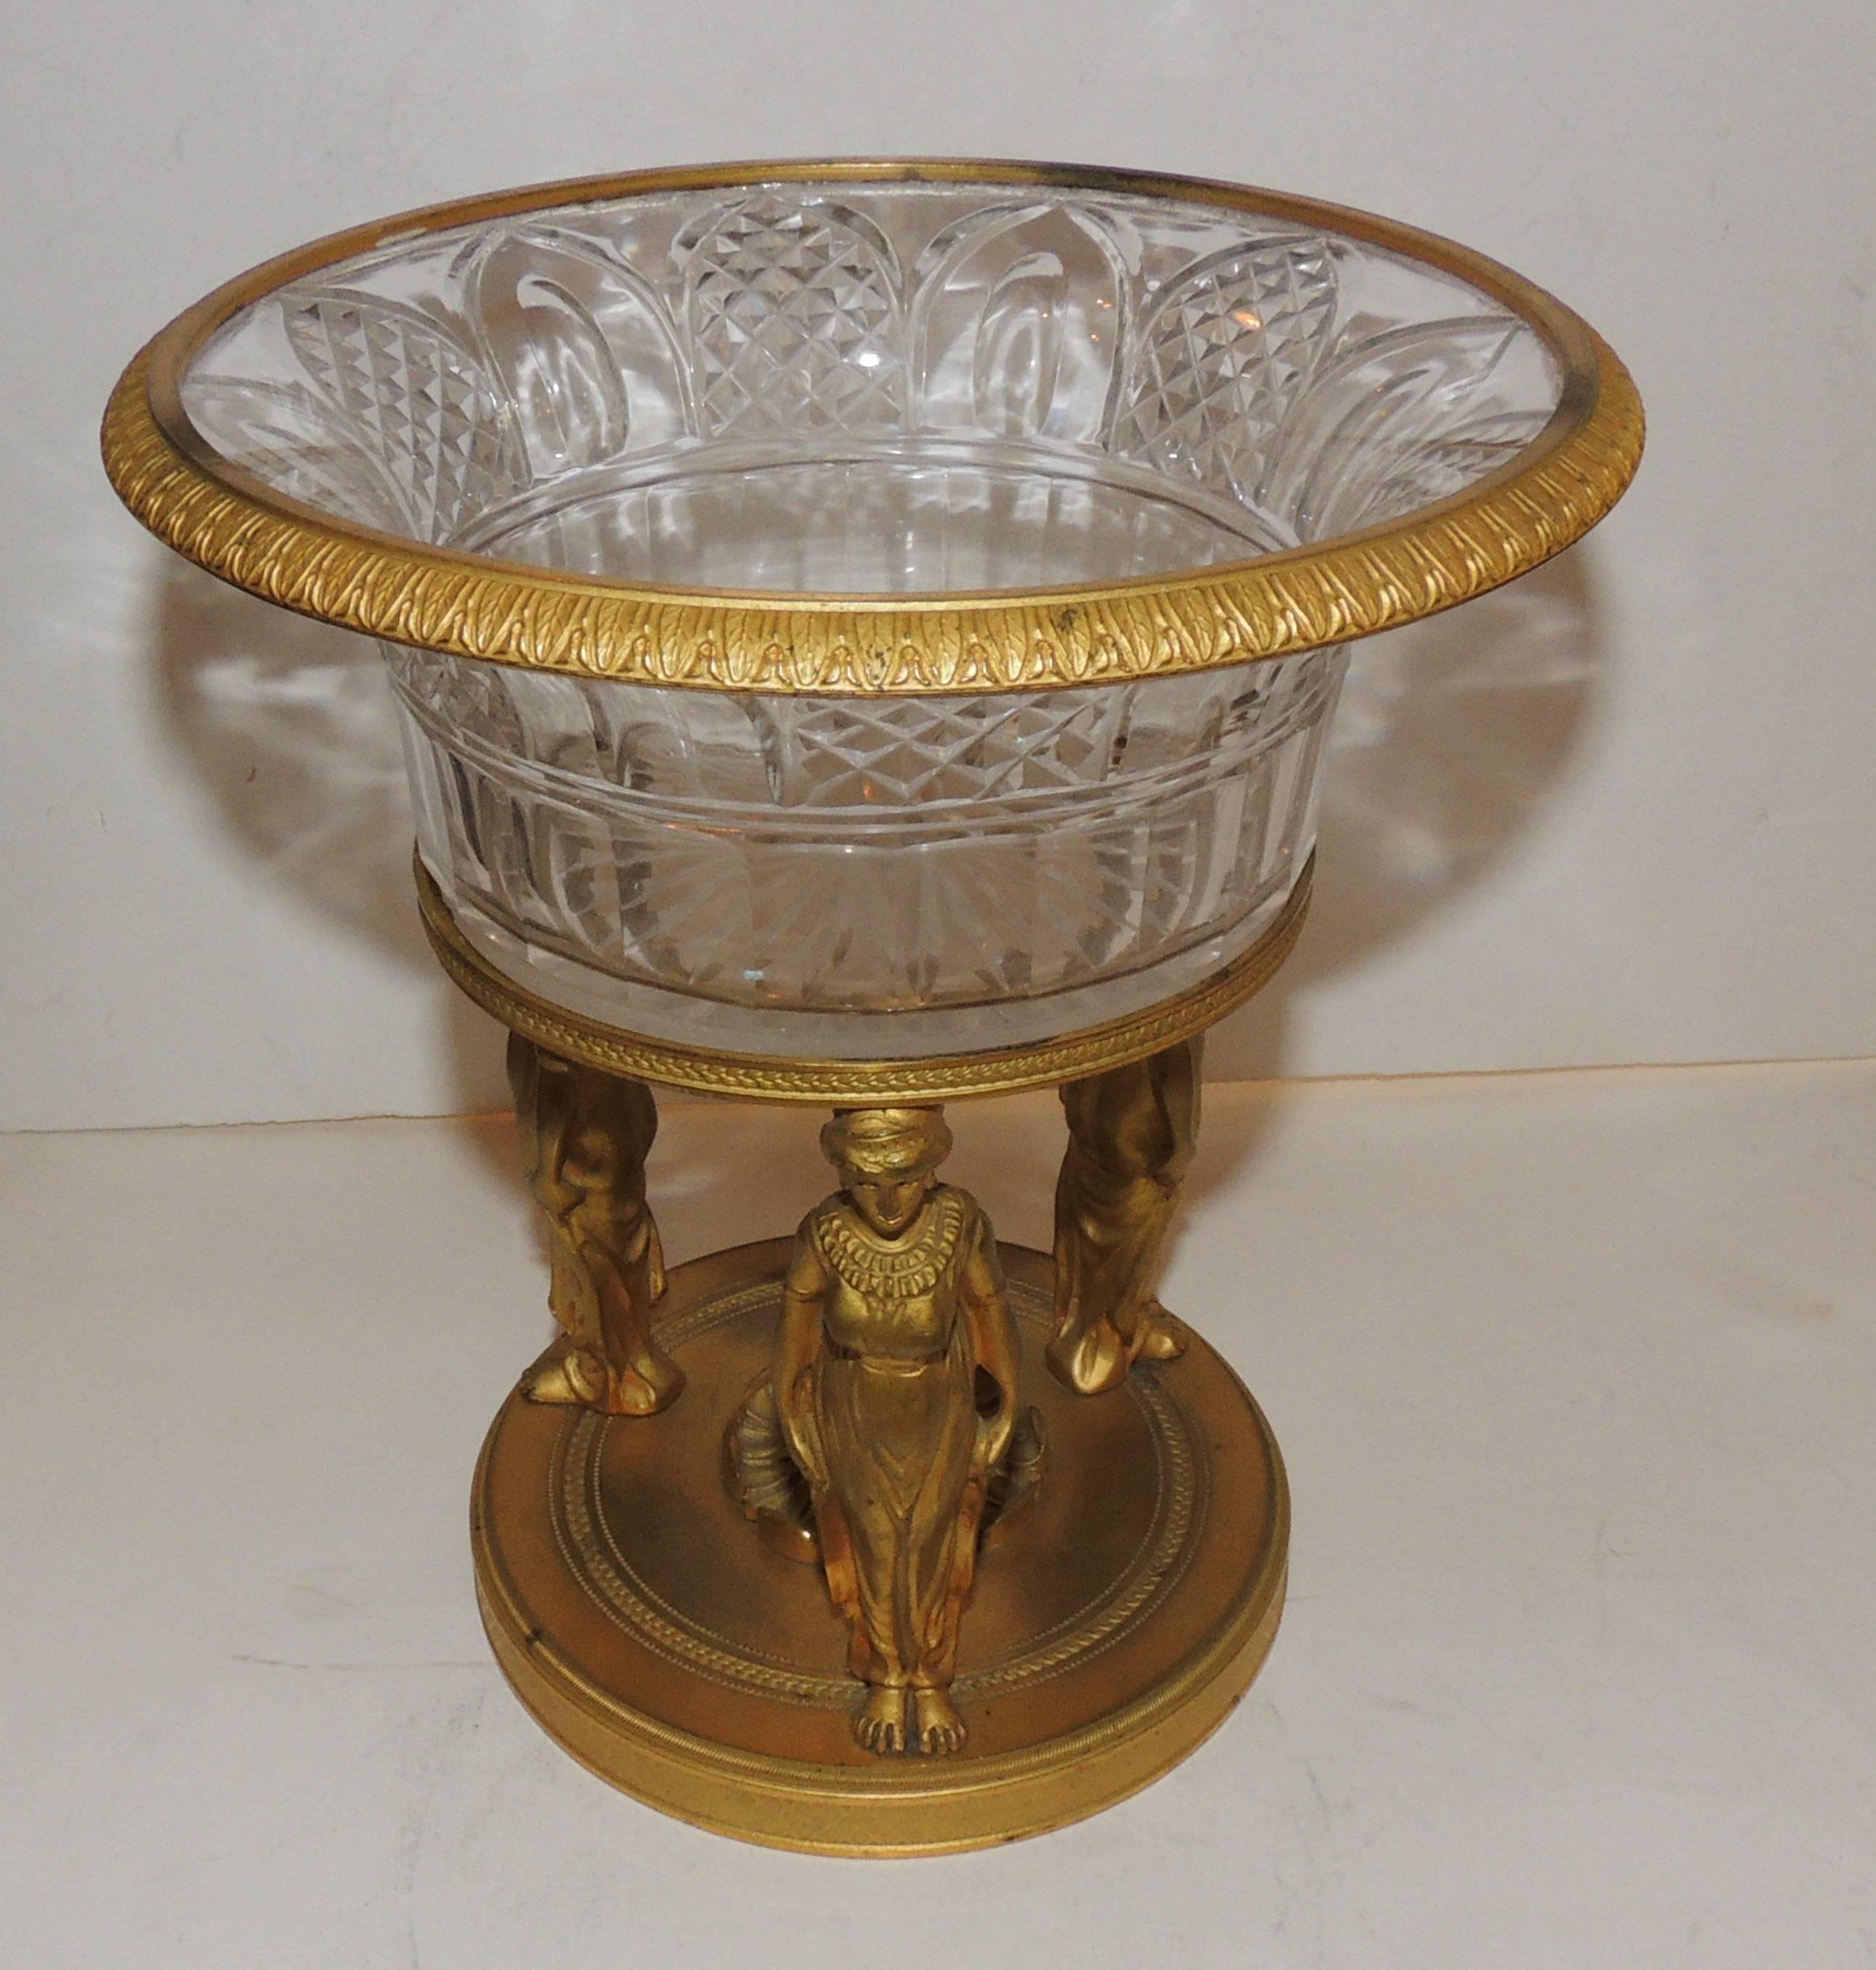 Wonderful French Empire Dore Bronze Cut Crystal Figural Neoclassical Centrepiece In Good Condition For Sale In Roslyn, NY